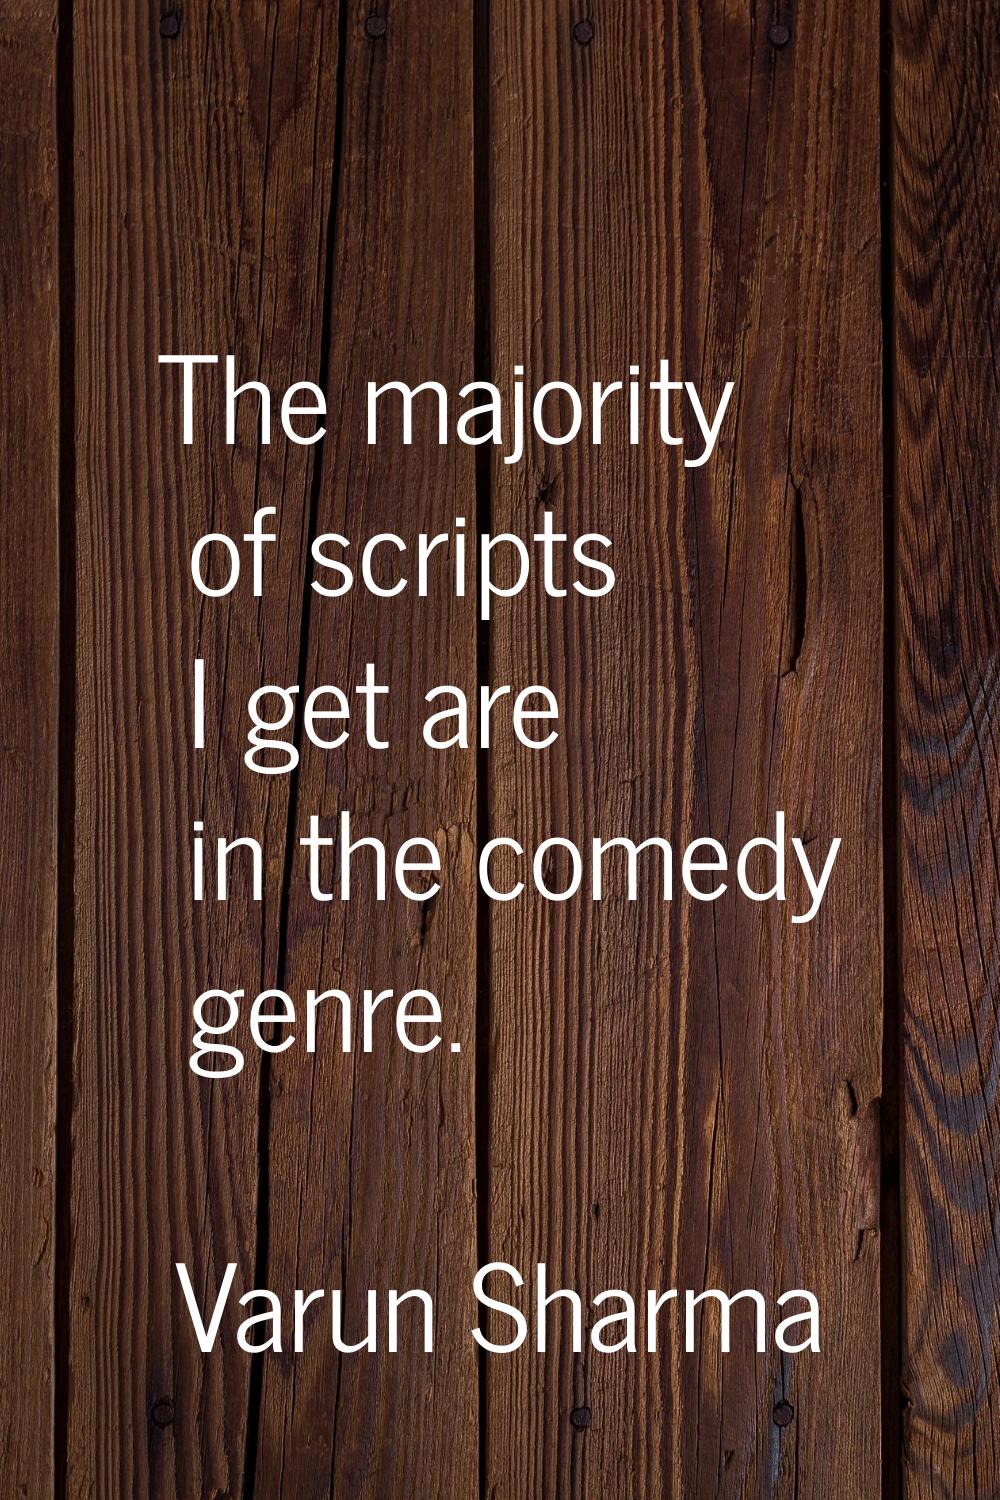 The majority of scripts I get are in the comedy genre.